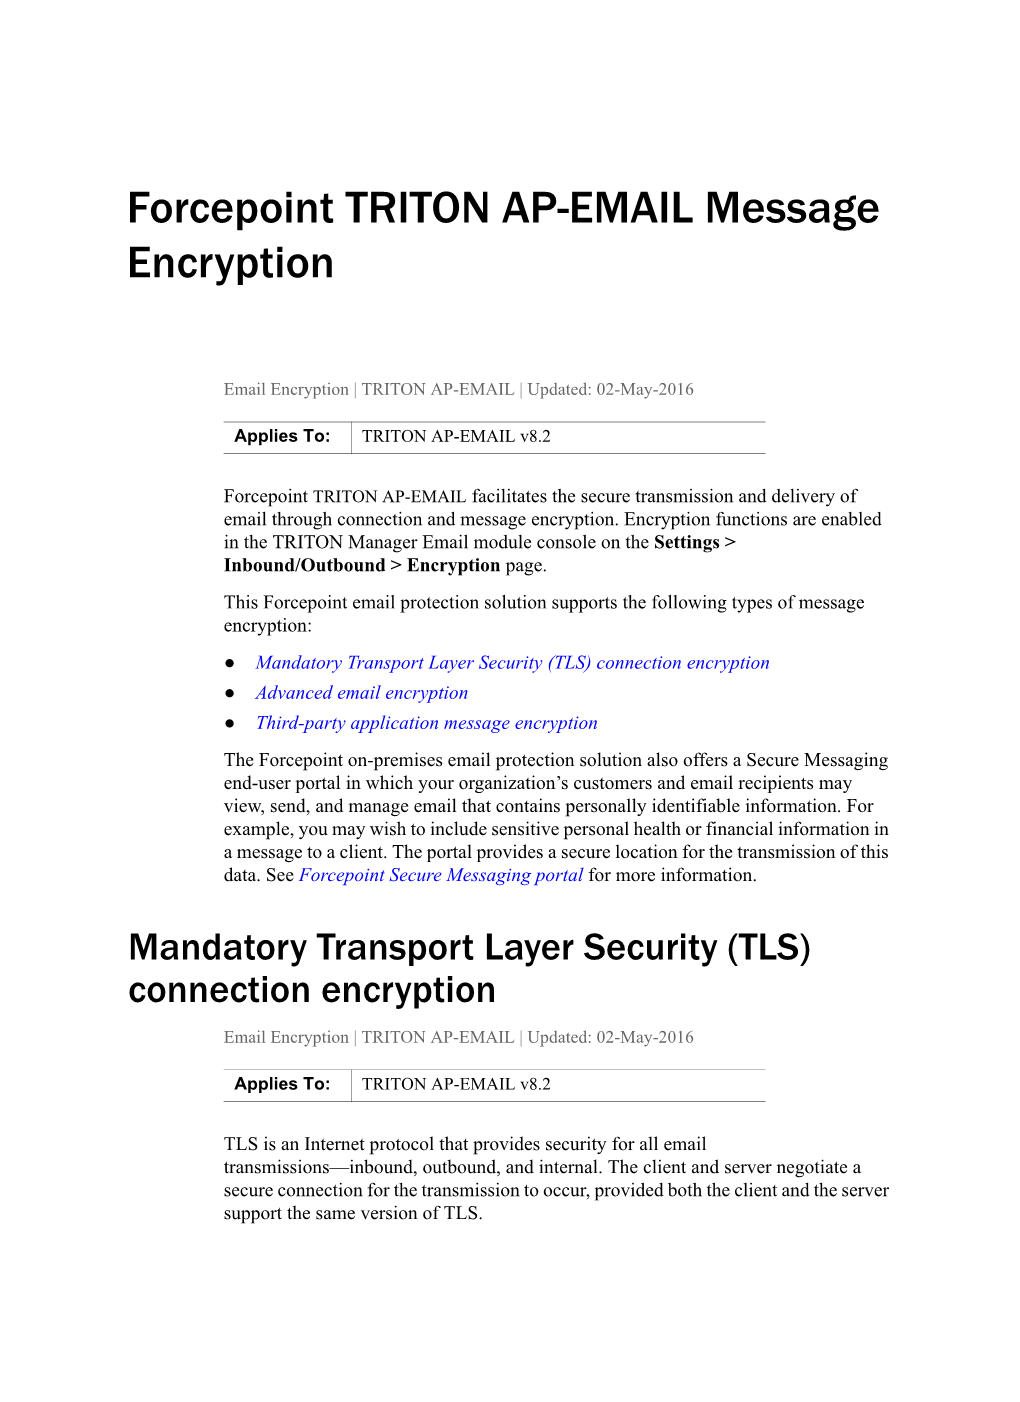 Forcepoint TRITON AP-EMAIL Message Encryption